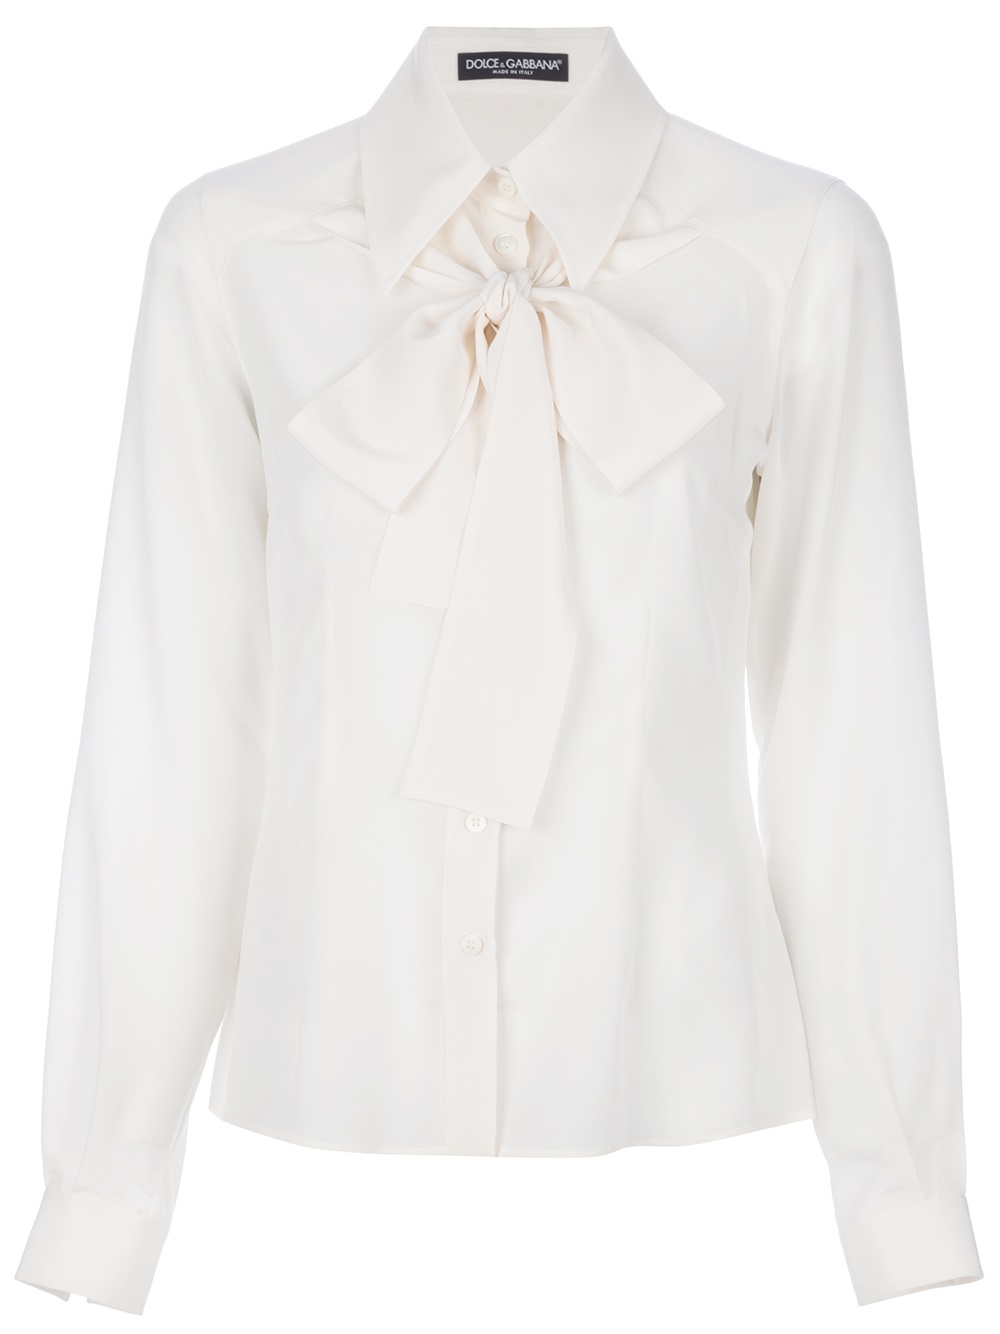 Lyst - Dolce & Gabbana Pussy Bow Shirt in White